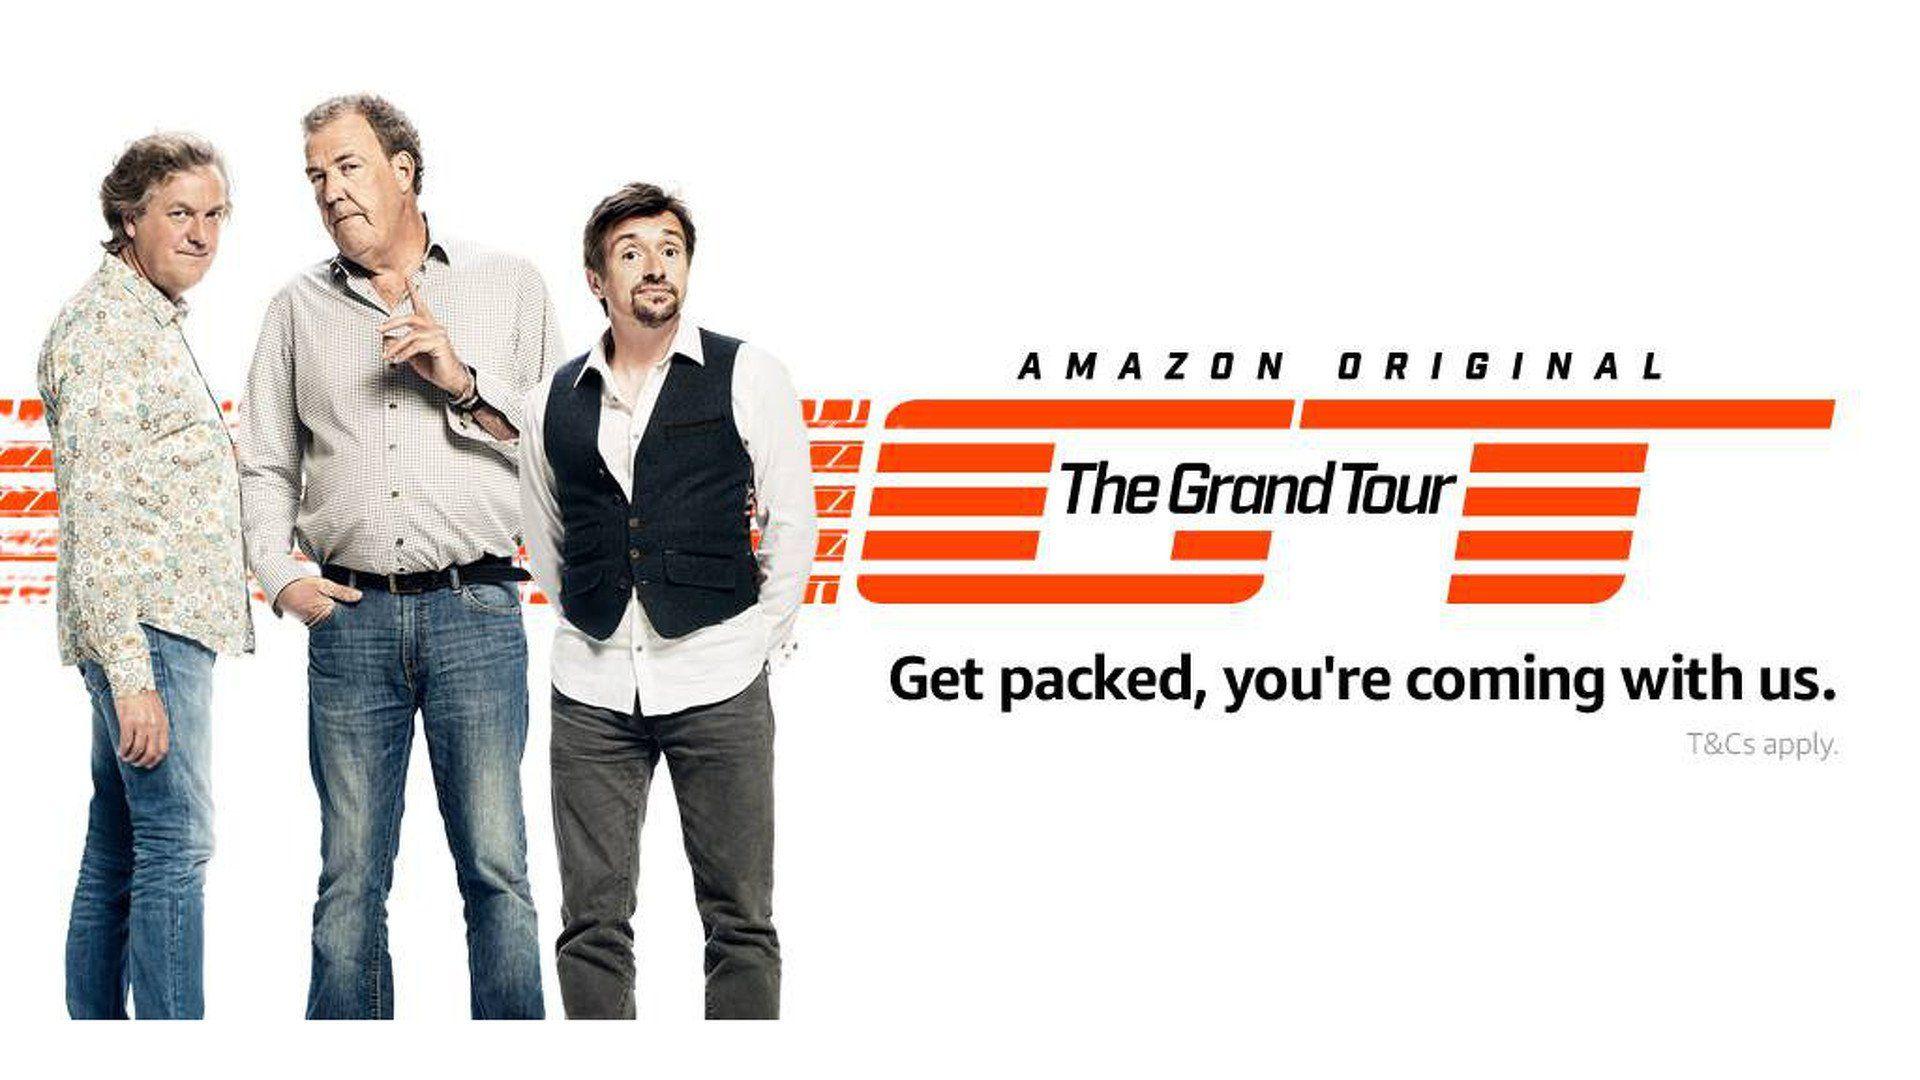 How to Watch the Full Sesason One of The Grand Tour Legally For Free